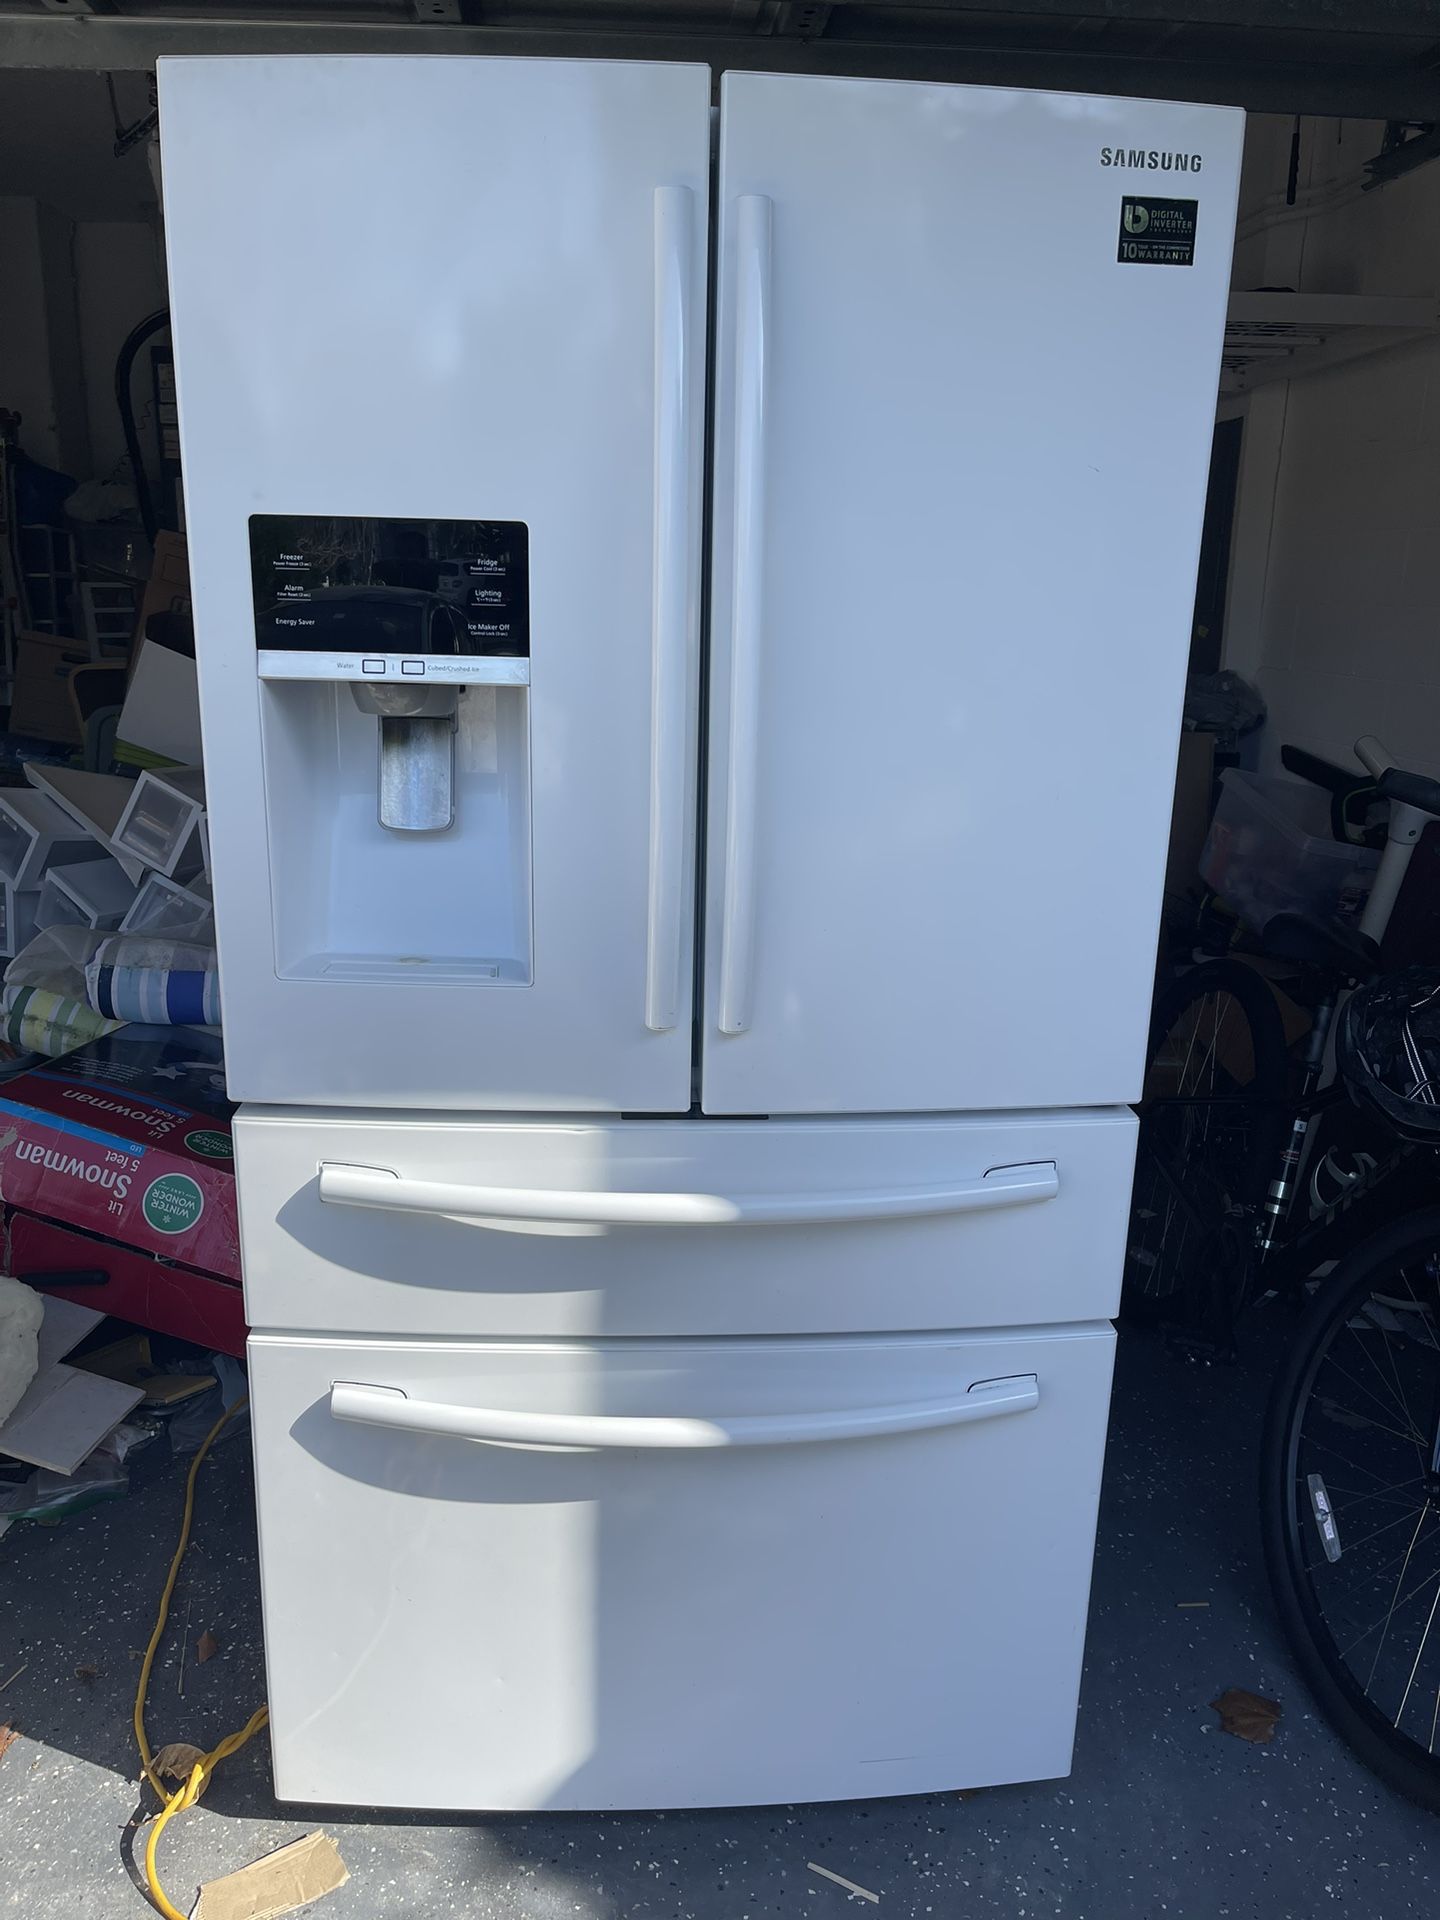 Samsung French Door Refrigerator - White - Very Good Condition - DELIVERY